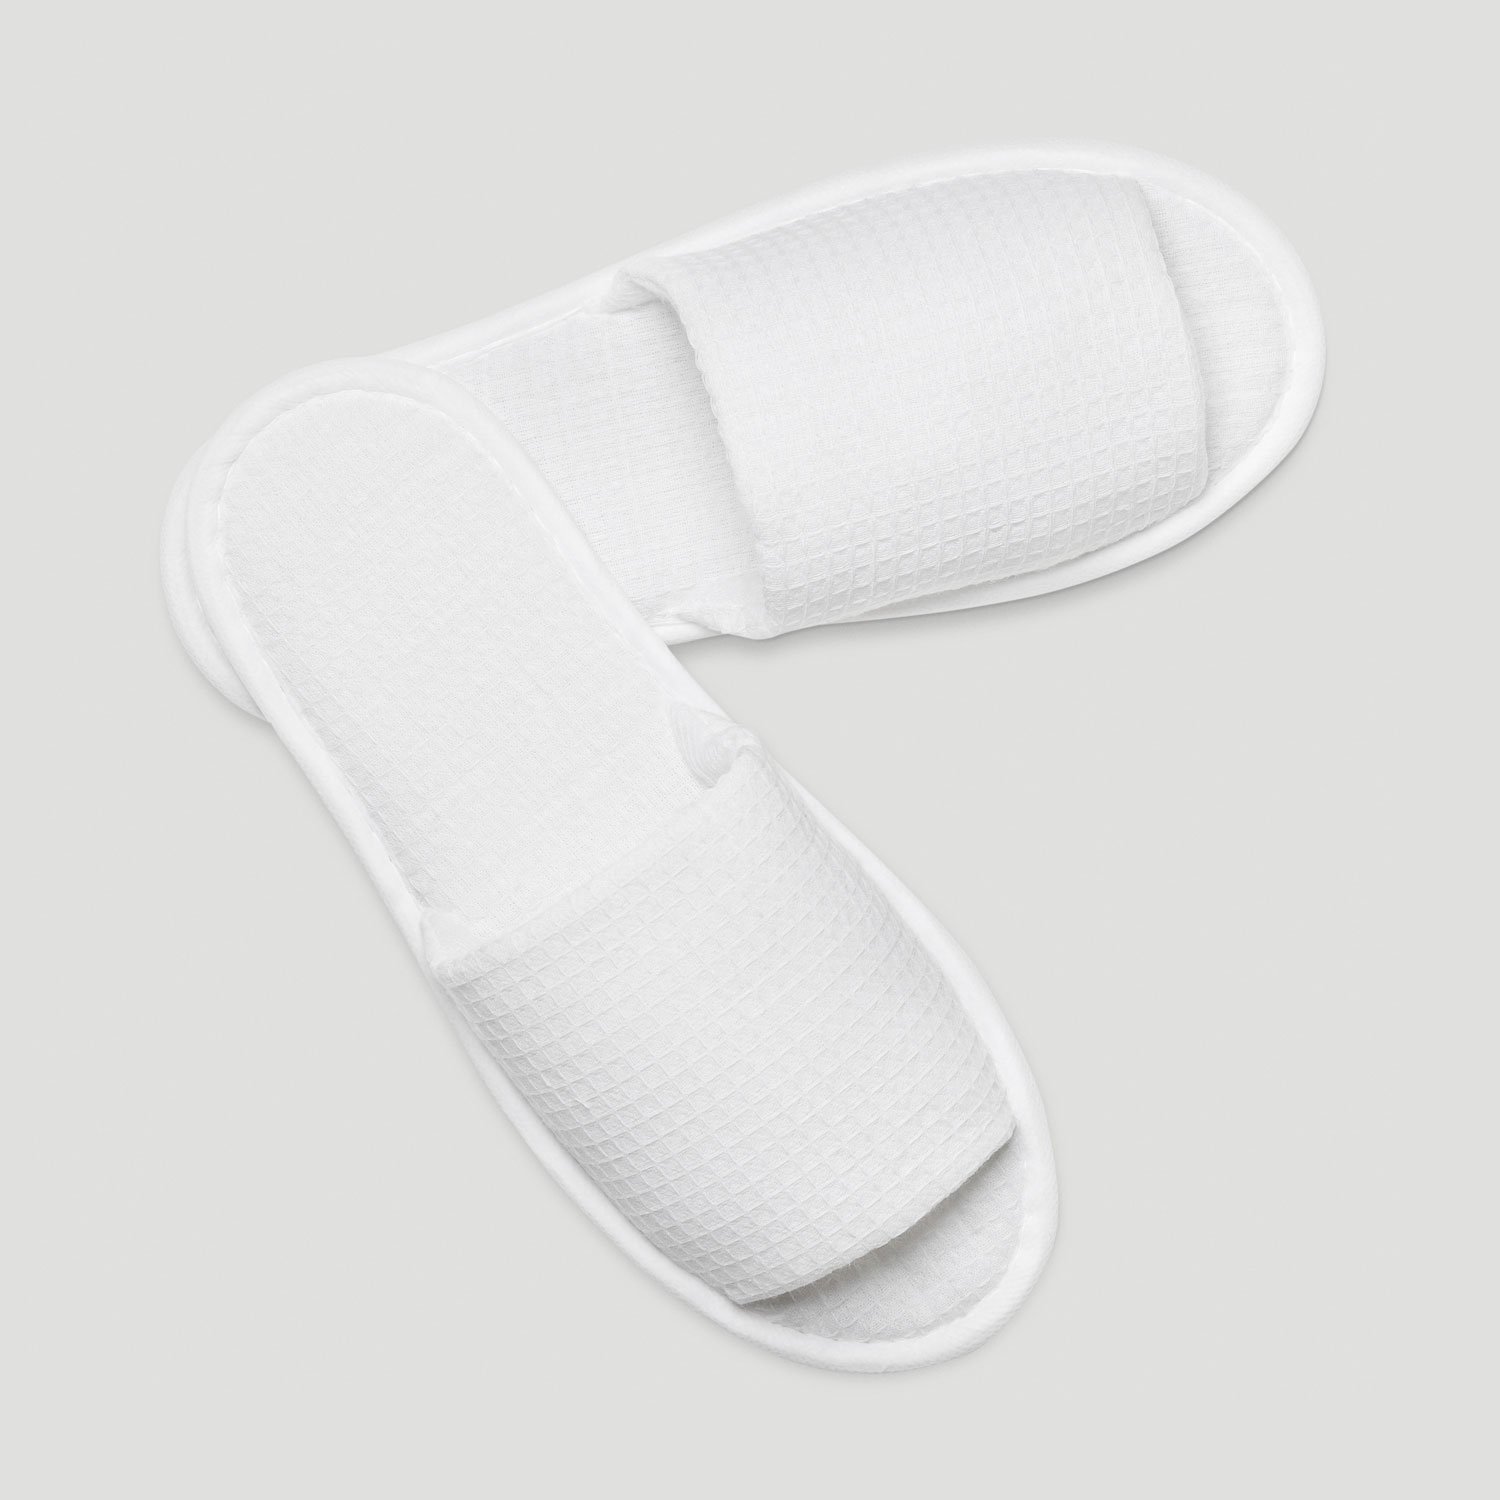 Men :: Slippers :: Waffle Slippers :: White Waffle Open Toe Adult Slippers 6 - Wholesale bathrobes, Spa robes, Kids Cotton robes, Spa Wholesale Towels